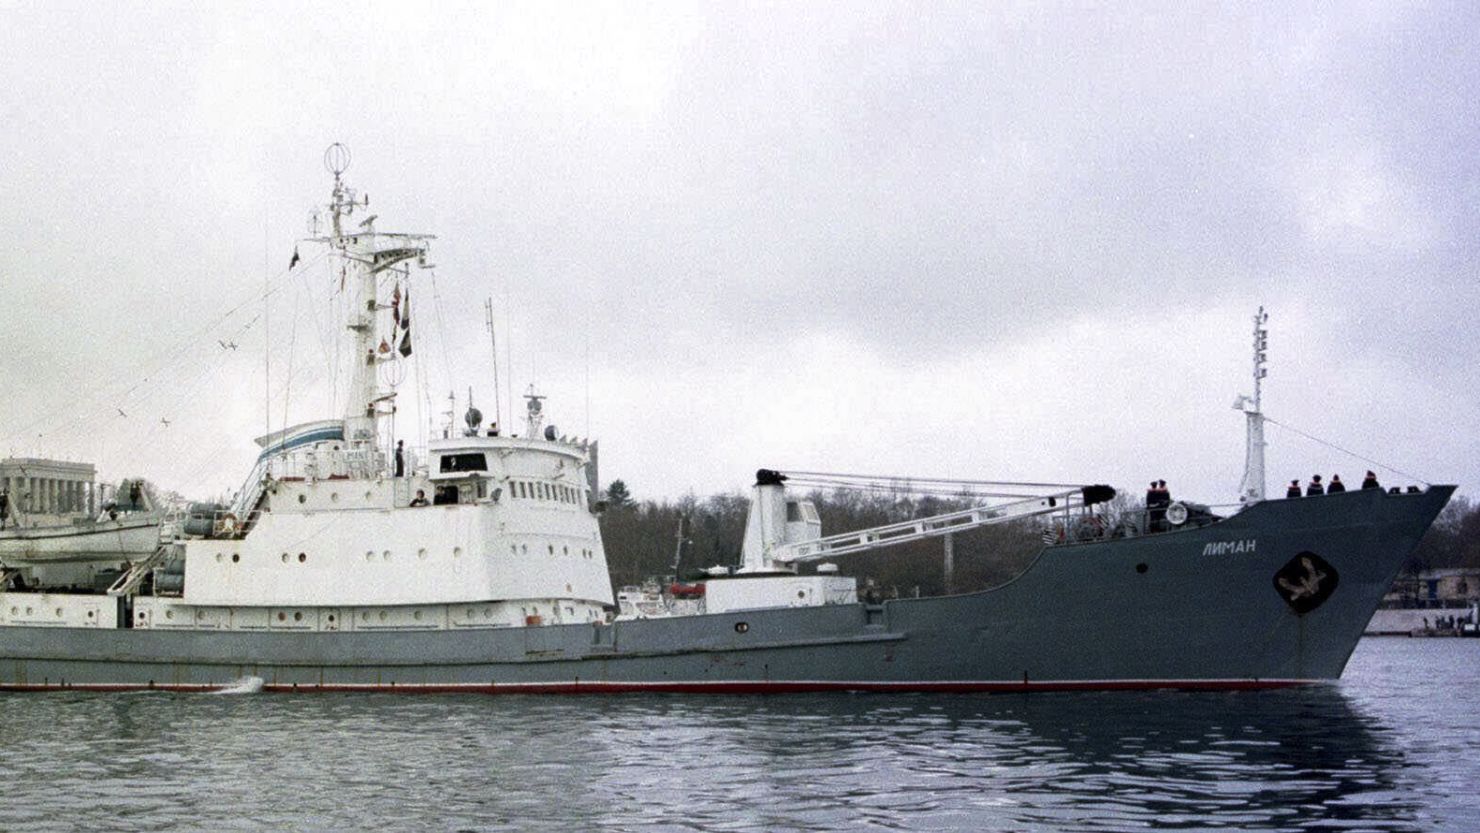 The Liman (pictured in a 1999 file photo) sunk off the coast of Turkey Thursday.